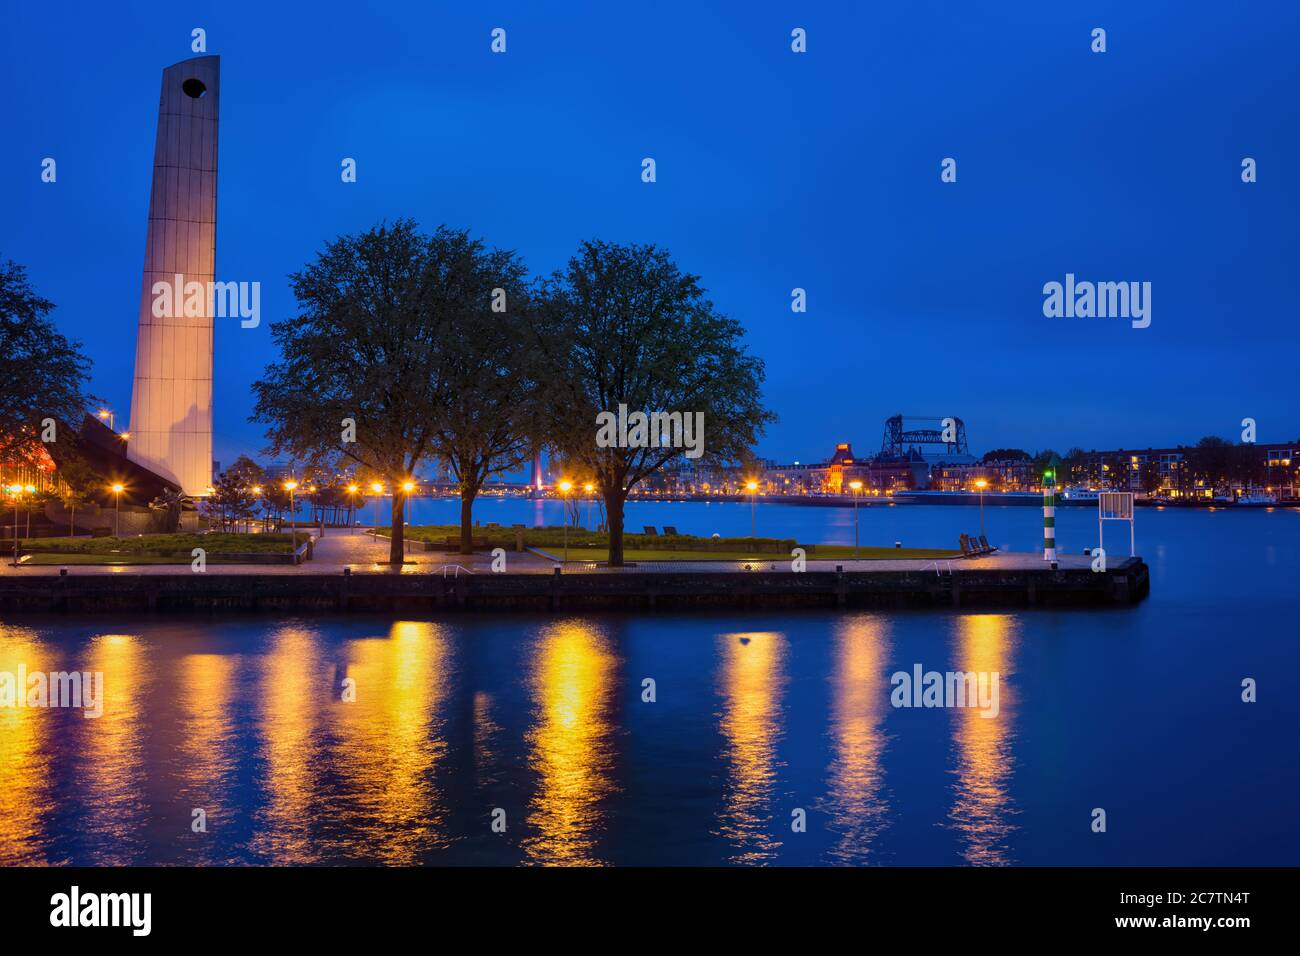 Rotterdam city river waterfront at night with De Boeg (The Bow) WWII war memorial monument, Holland, the Netherlands Stock Photo